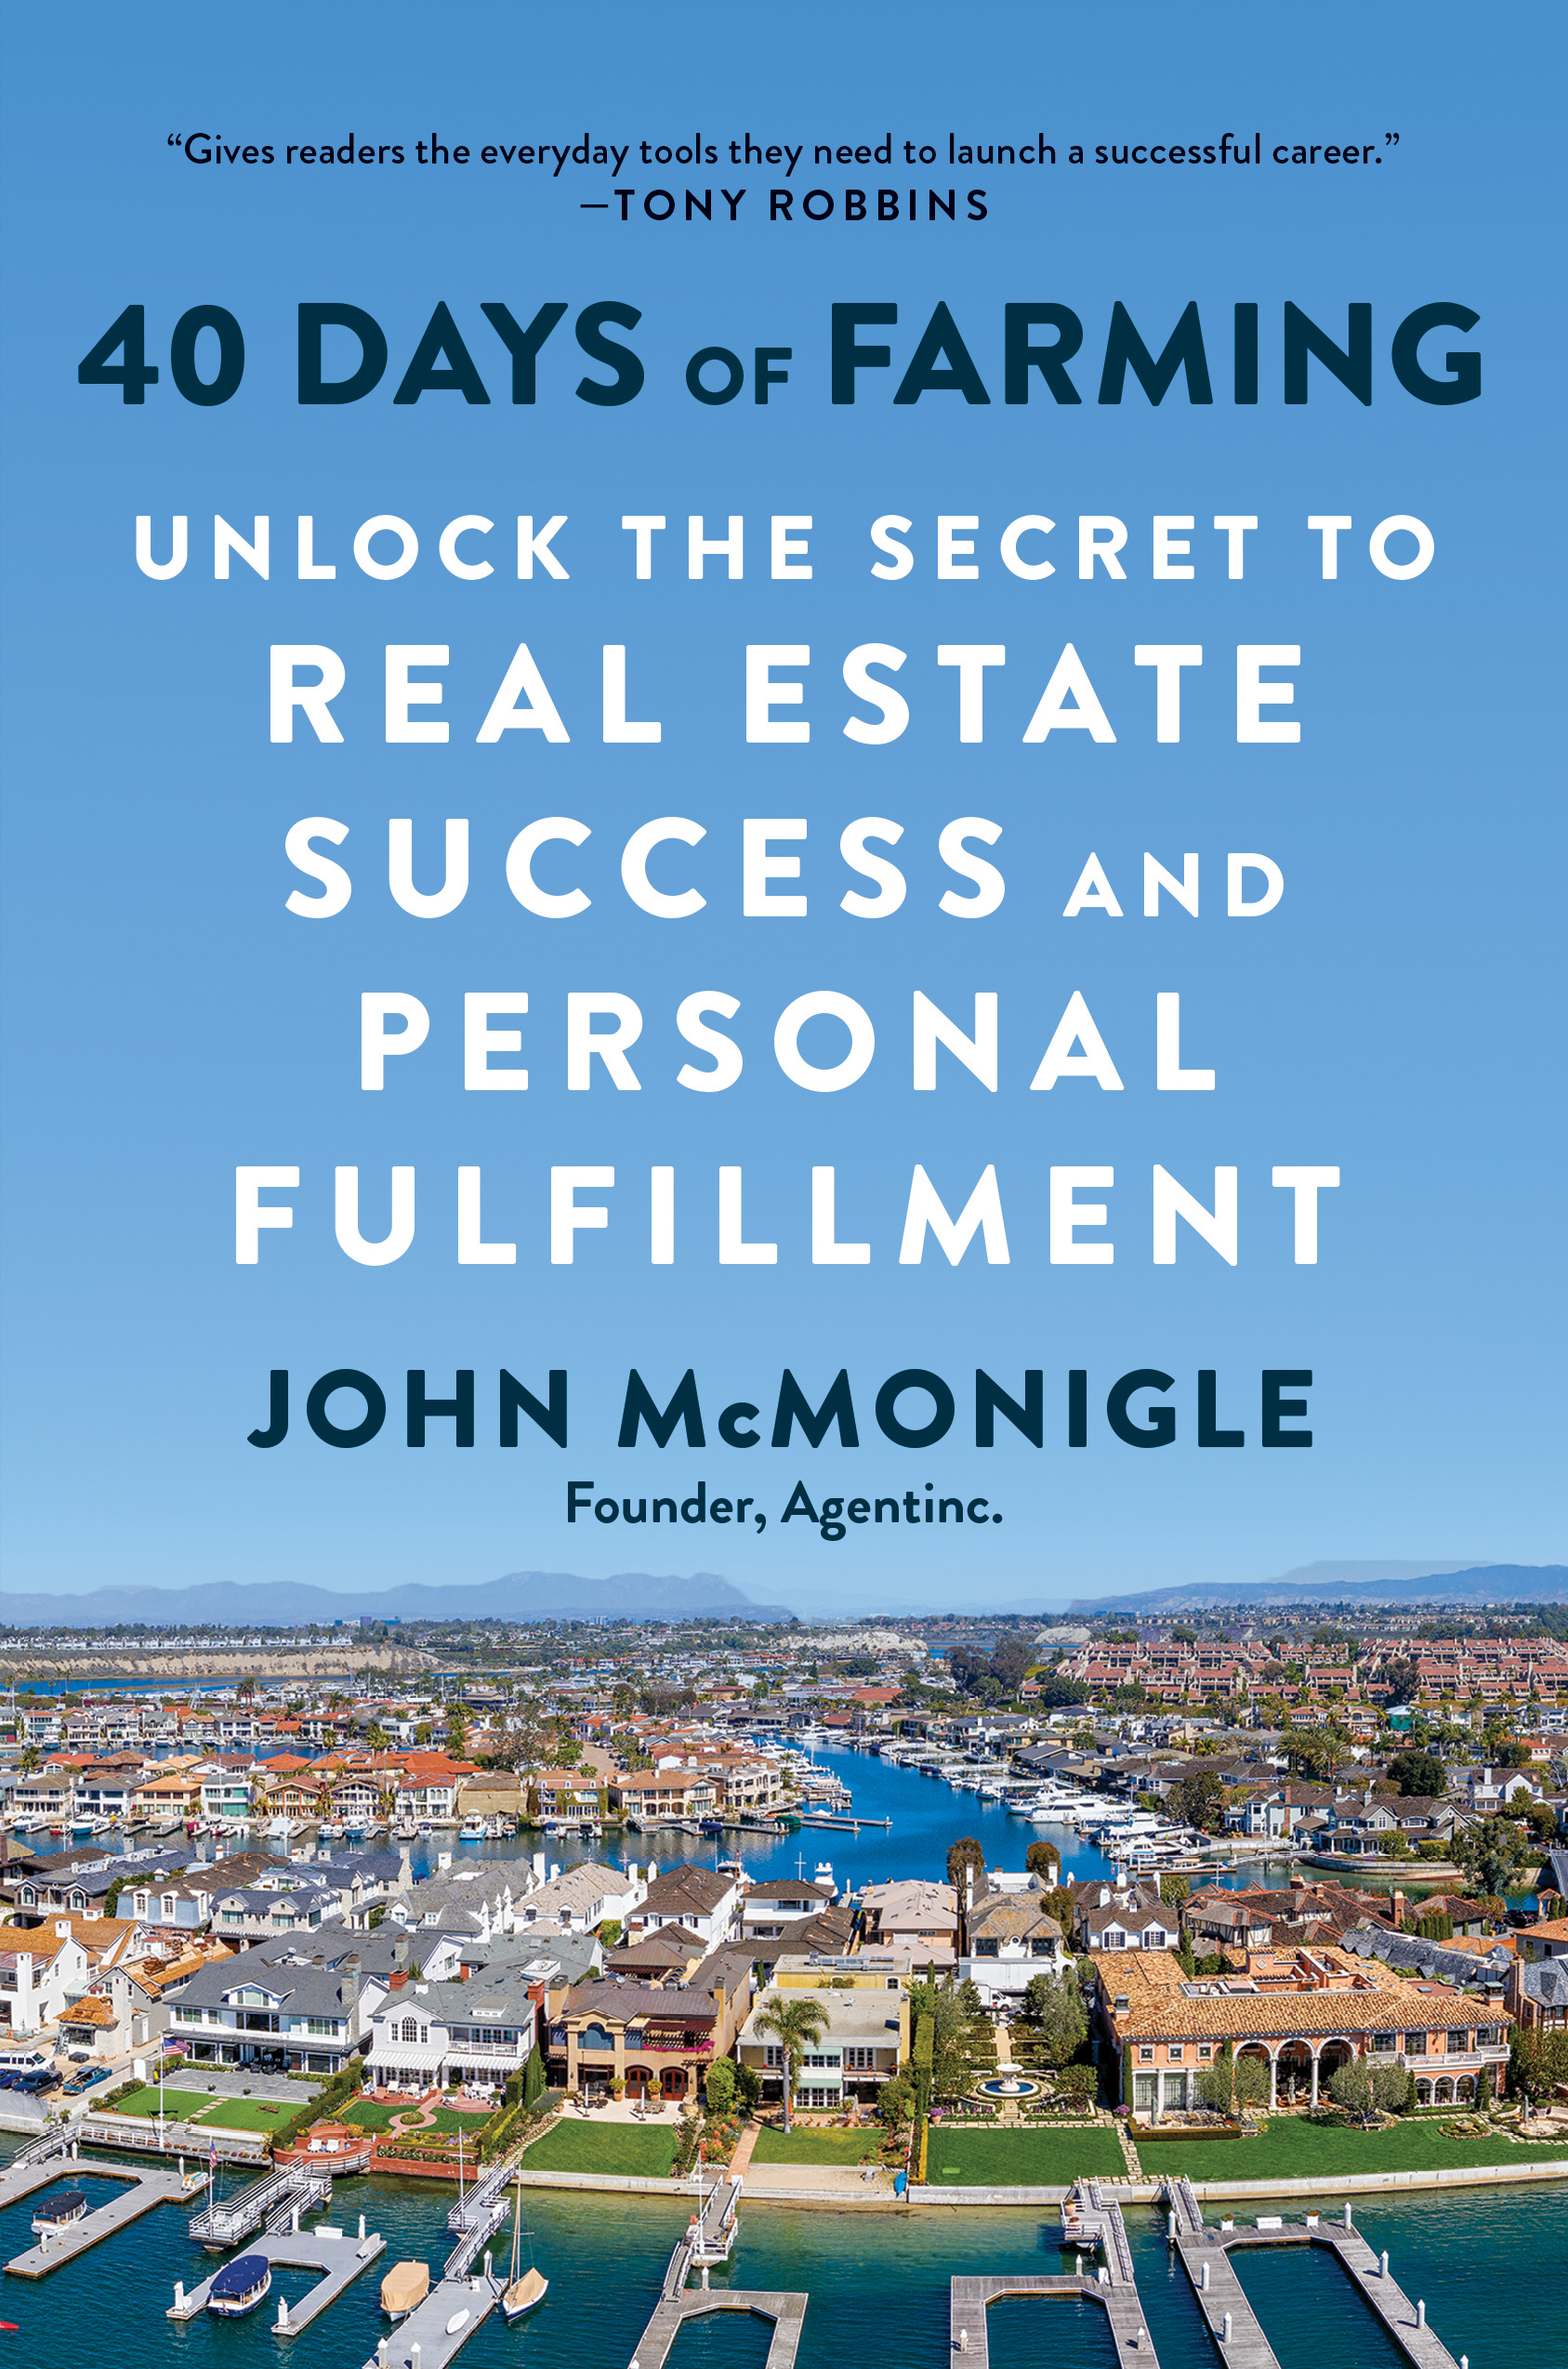 40 Days of Farming : Unlock the Secret to Real Estate Success and Personal Fulfillment | Business & Management